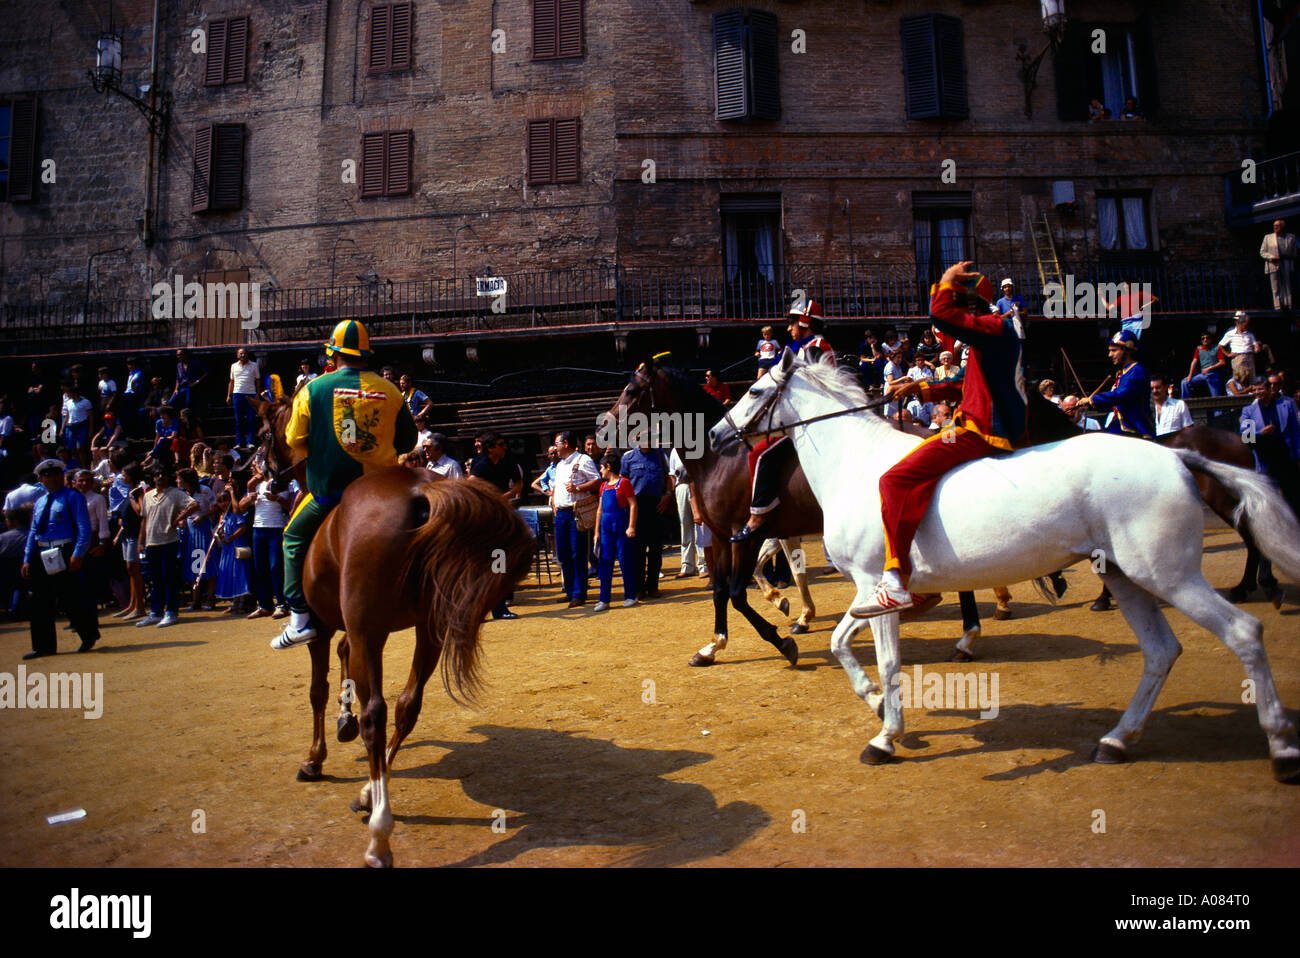 Siena Italy Tourists and Locals watching the Palio di Siena a Horse Raceheld twice a year at the Piazza Del Campo each Jockeys Represents One of the T Stock Photo